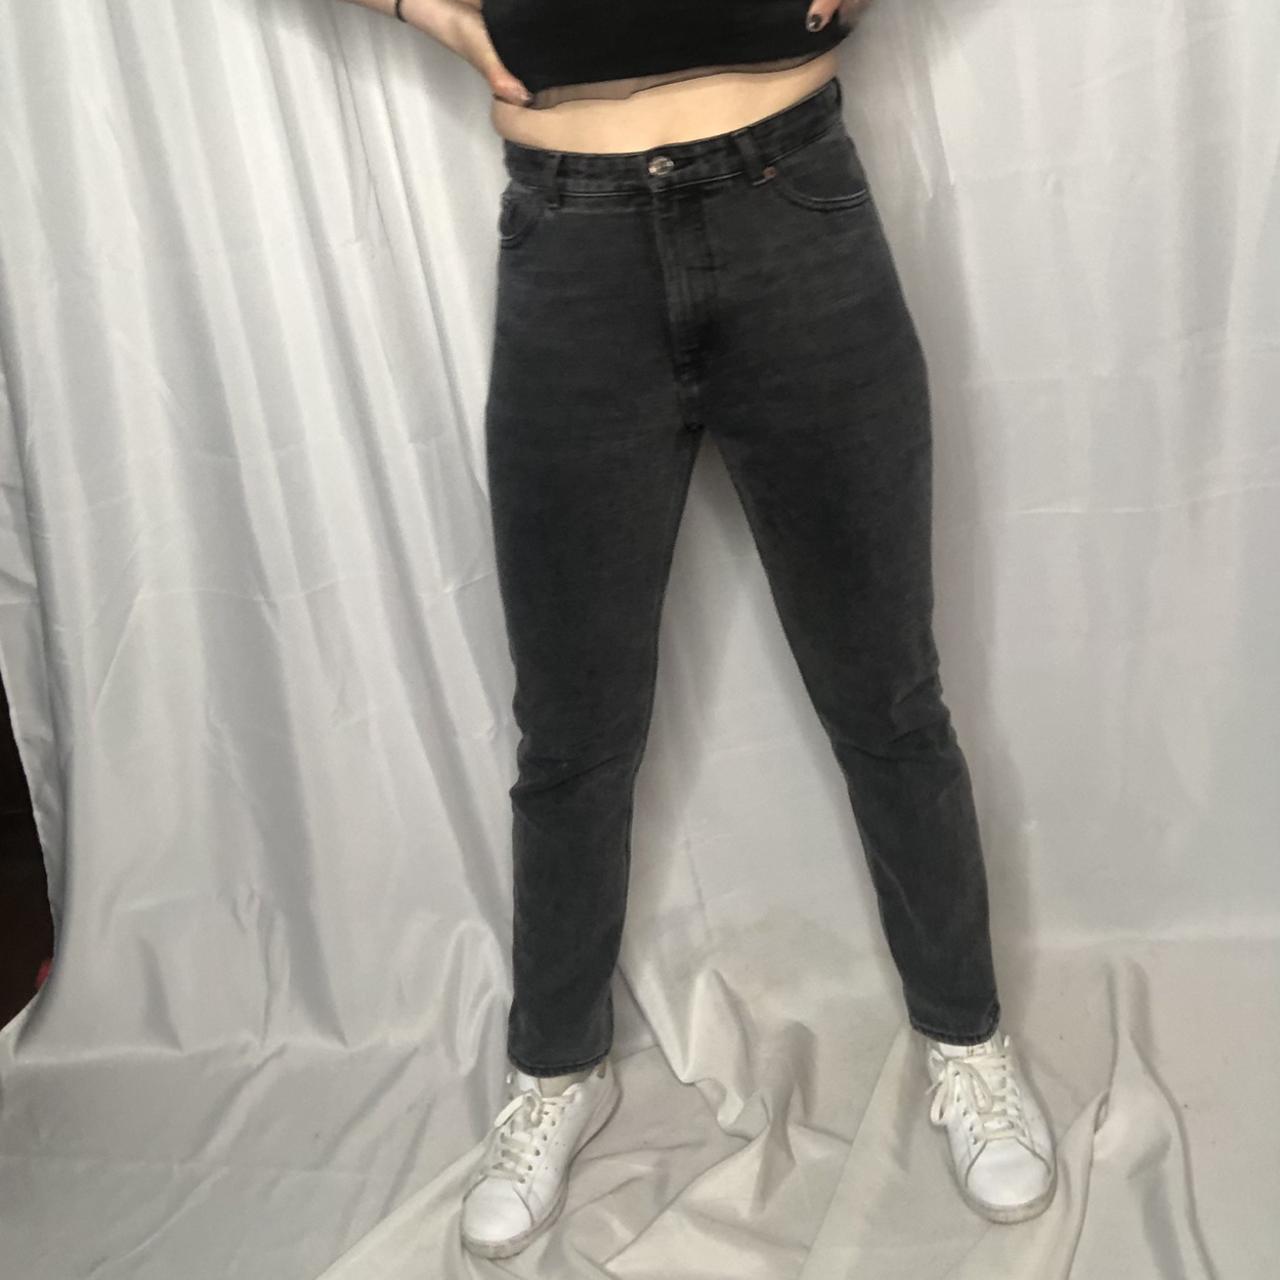 Product Image 3 - Monki Faded Black Wash Jeans.